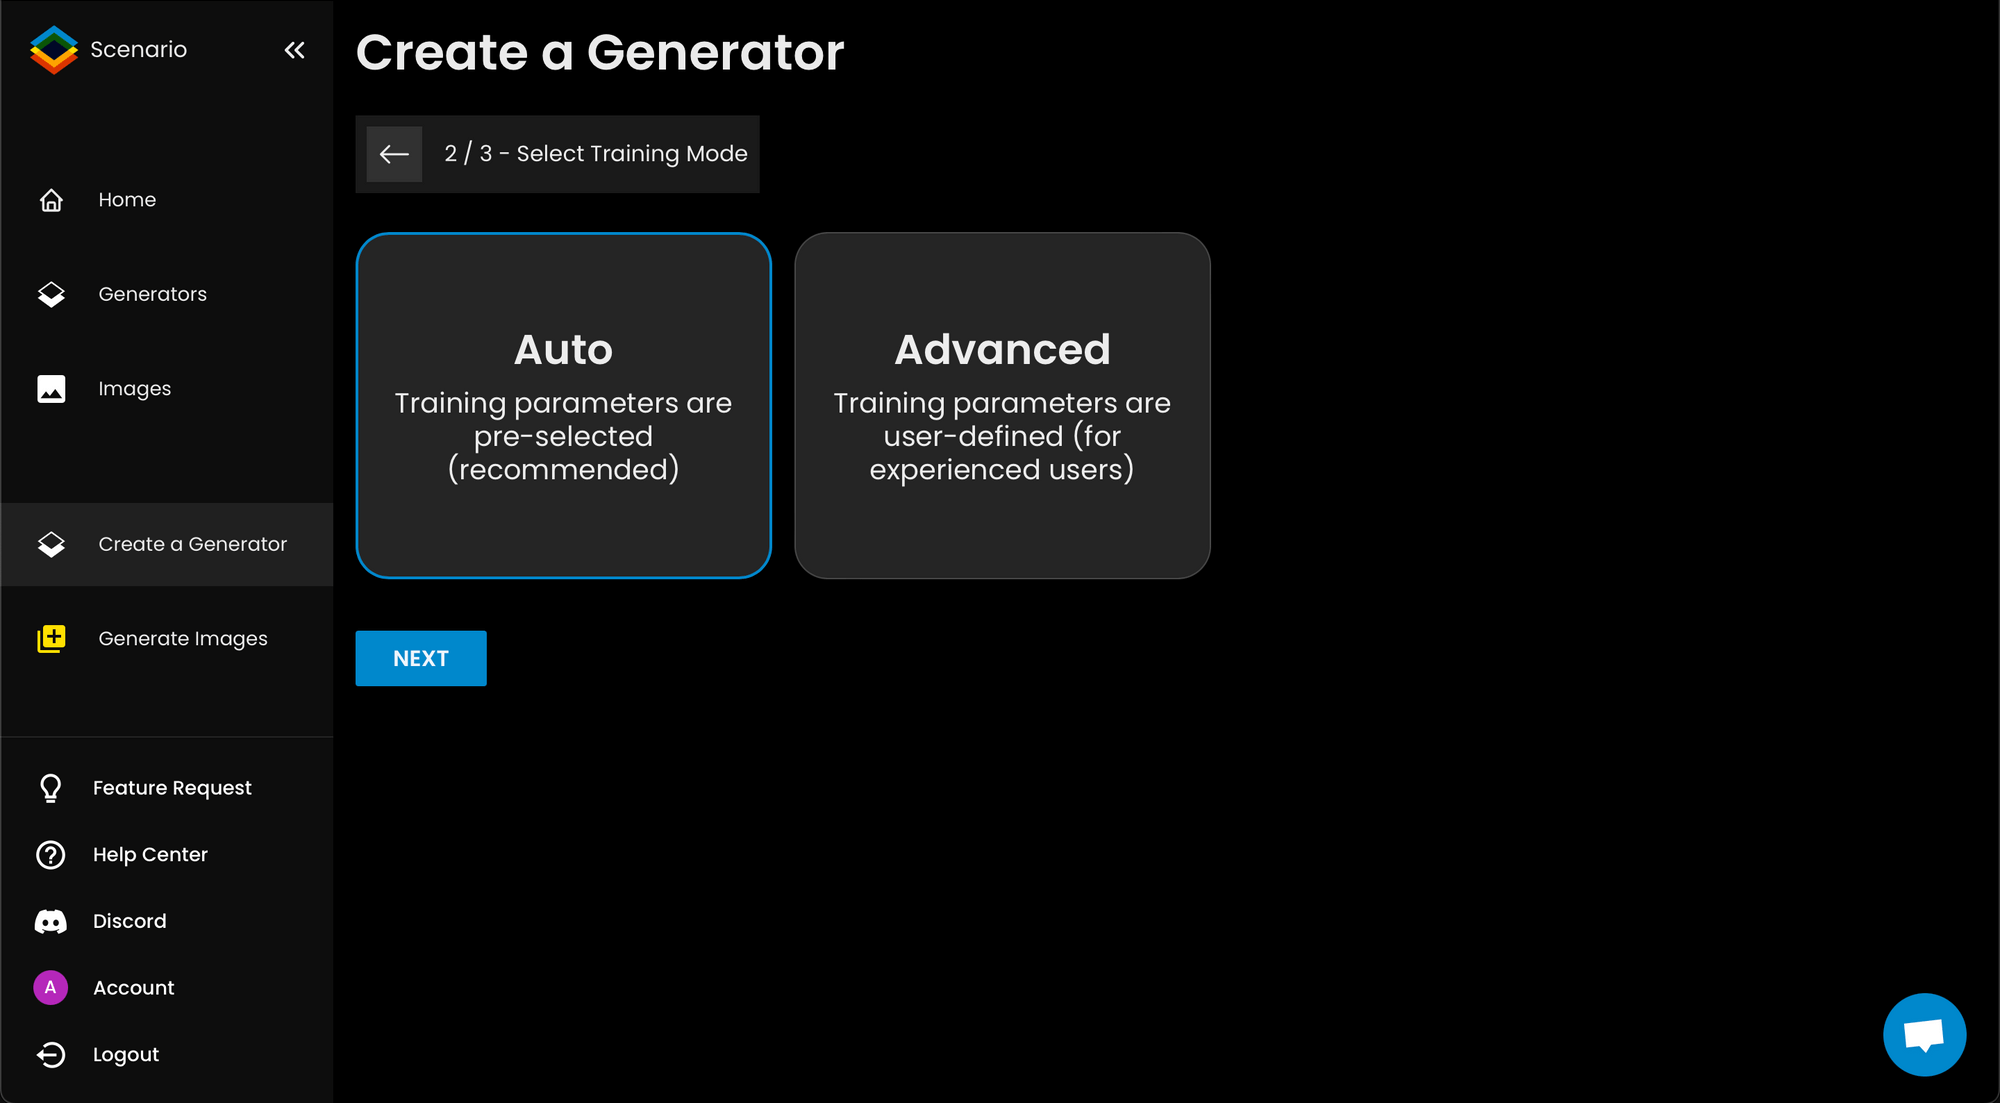 Select the training mode for the generator